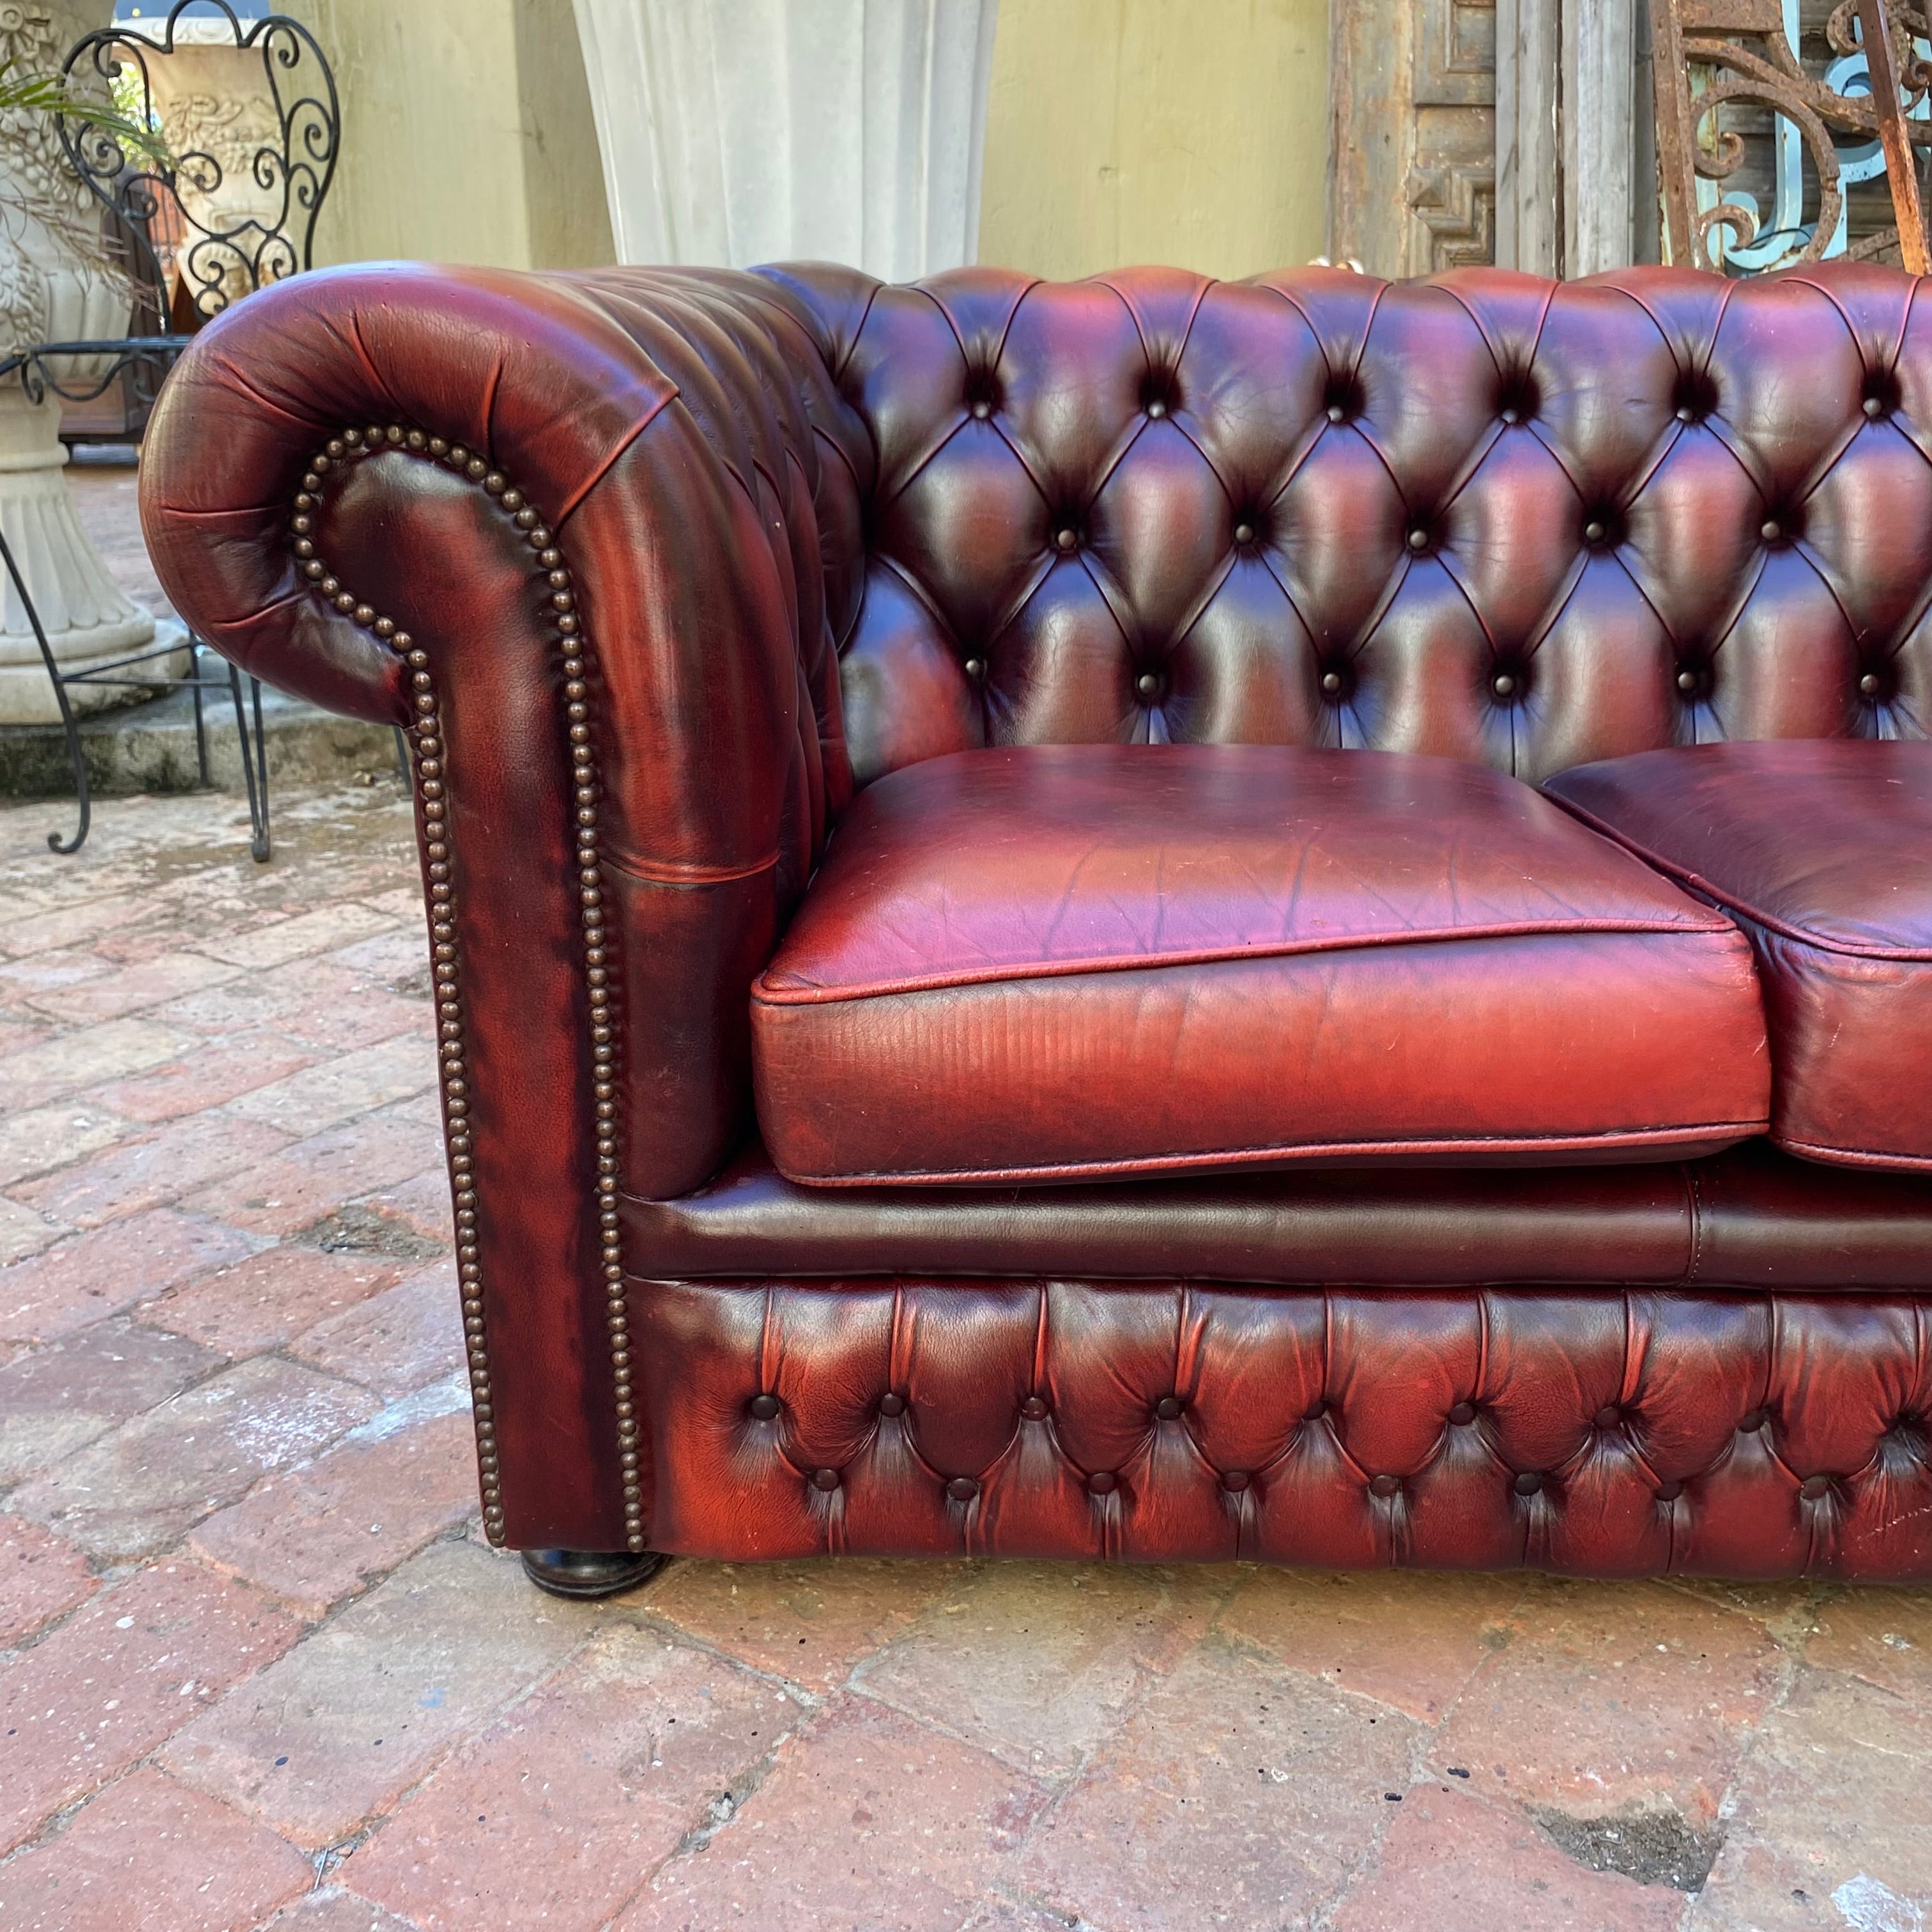 Beautiful Cherry Red Leather Chesterfield